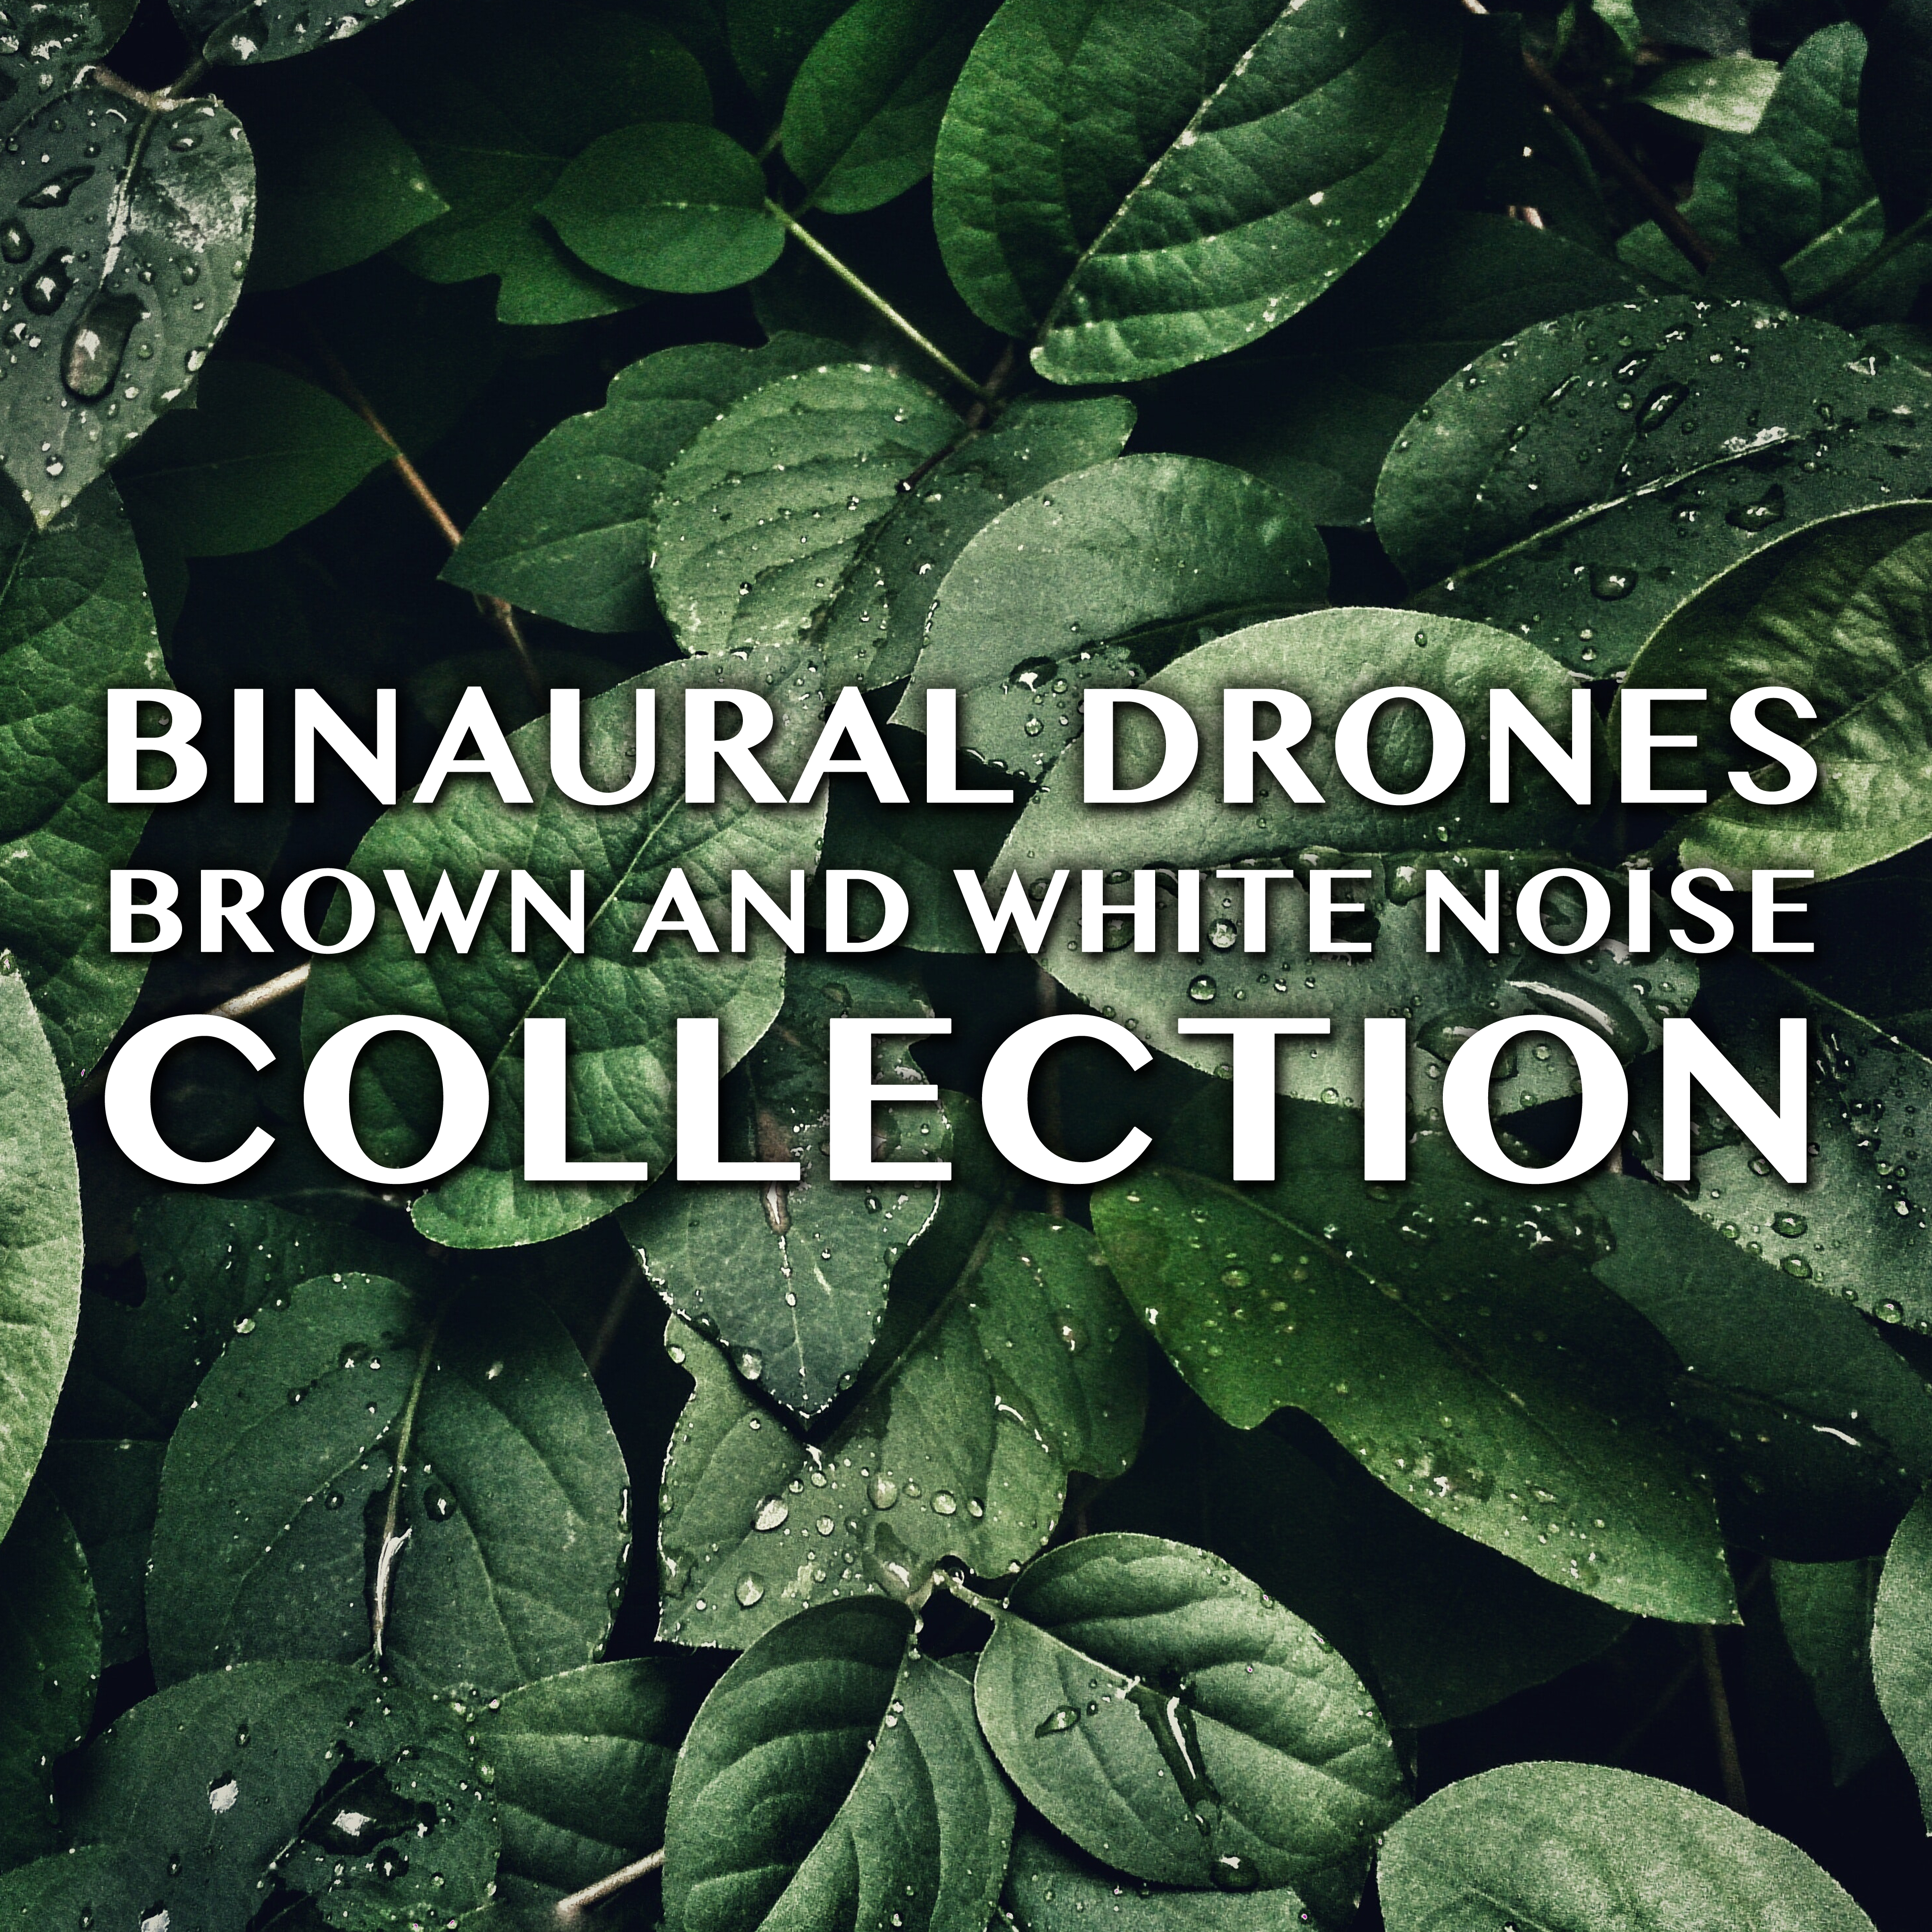 12 Binaural Drones: Brown and White Noise Collection